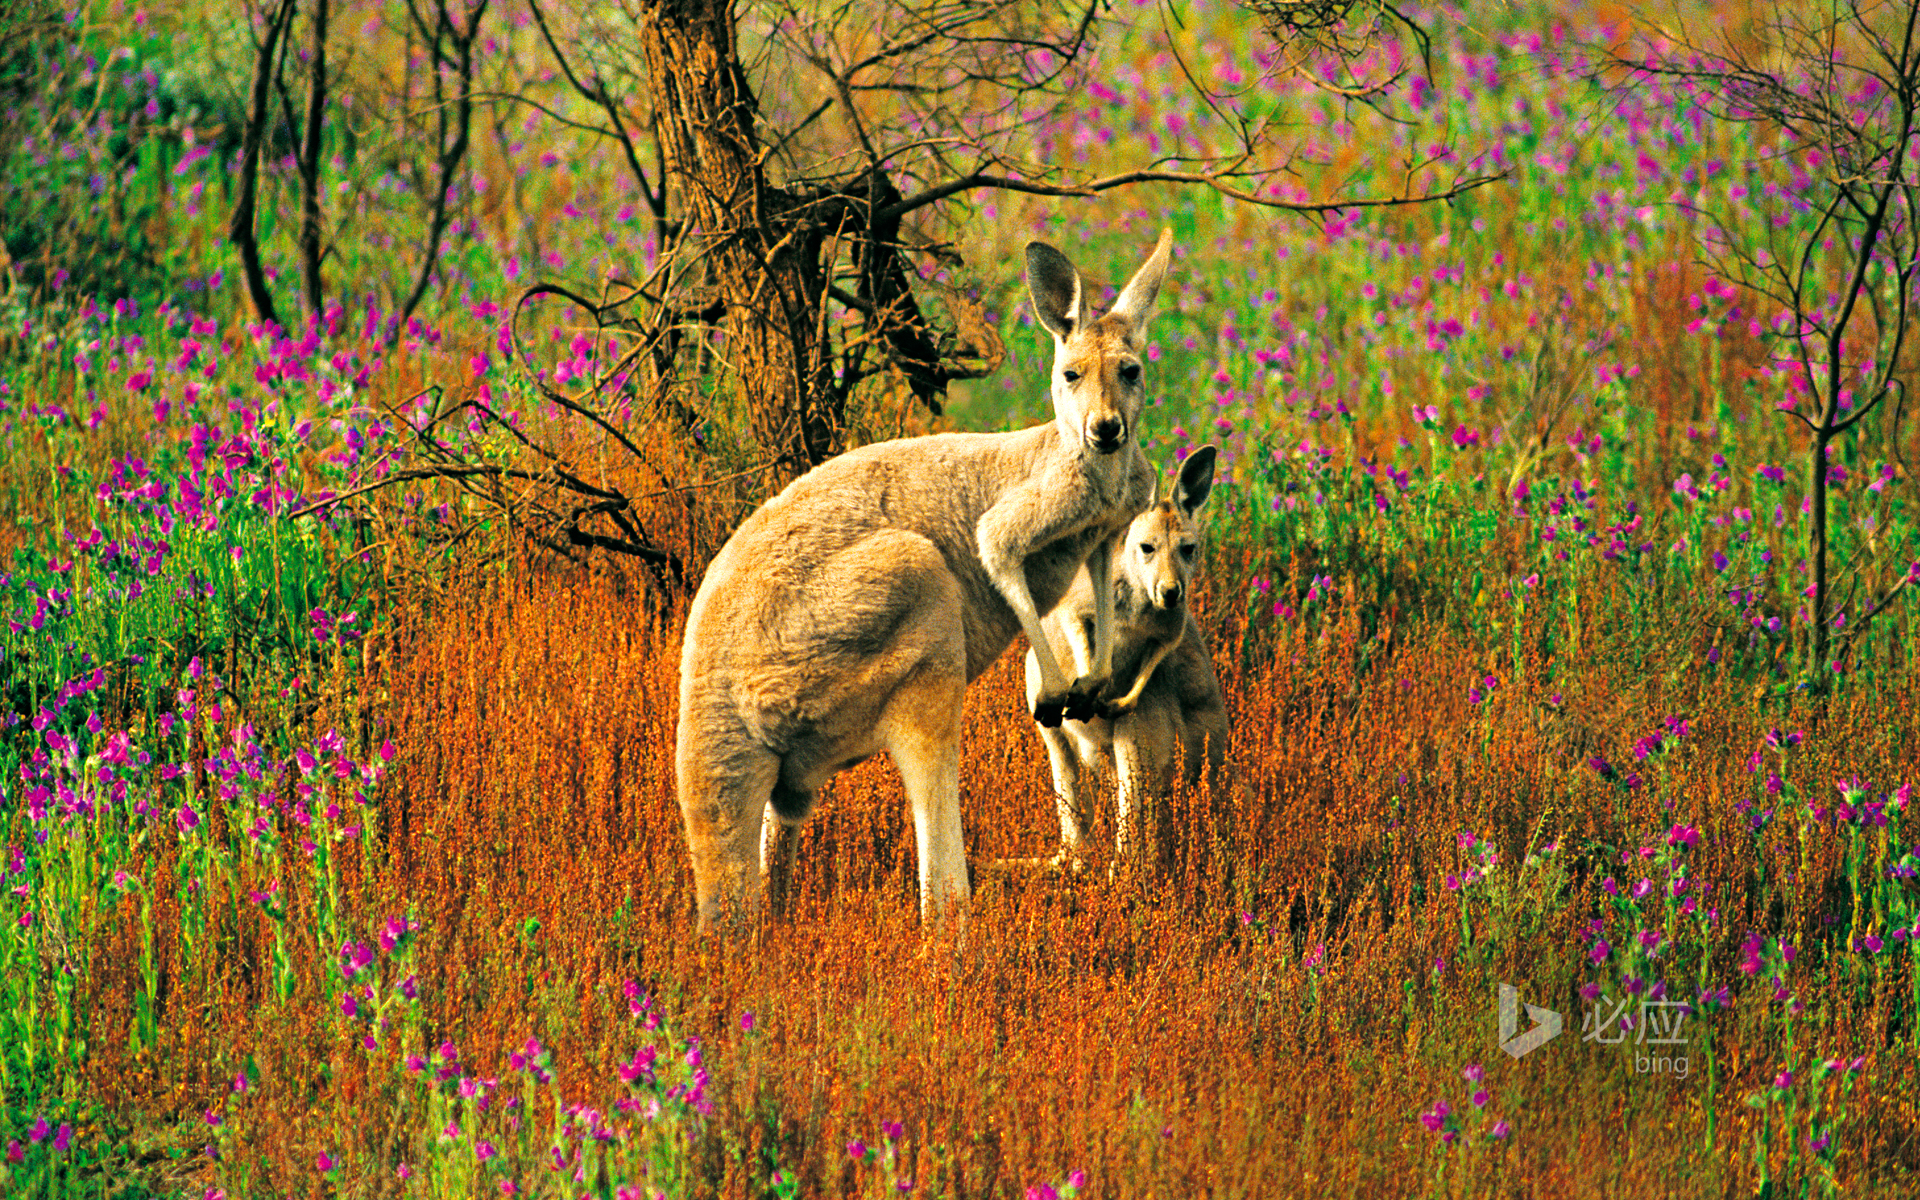 Flinders National Park, South Australia, Great Red Kangaroo with its children